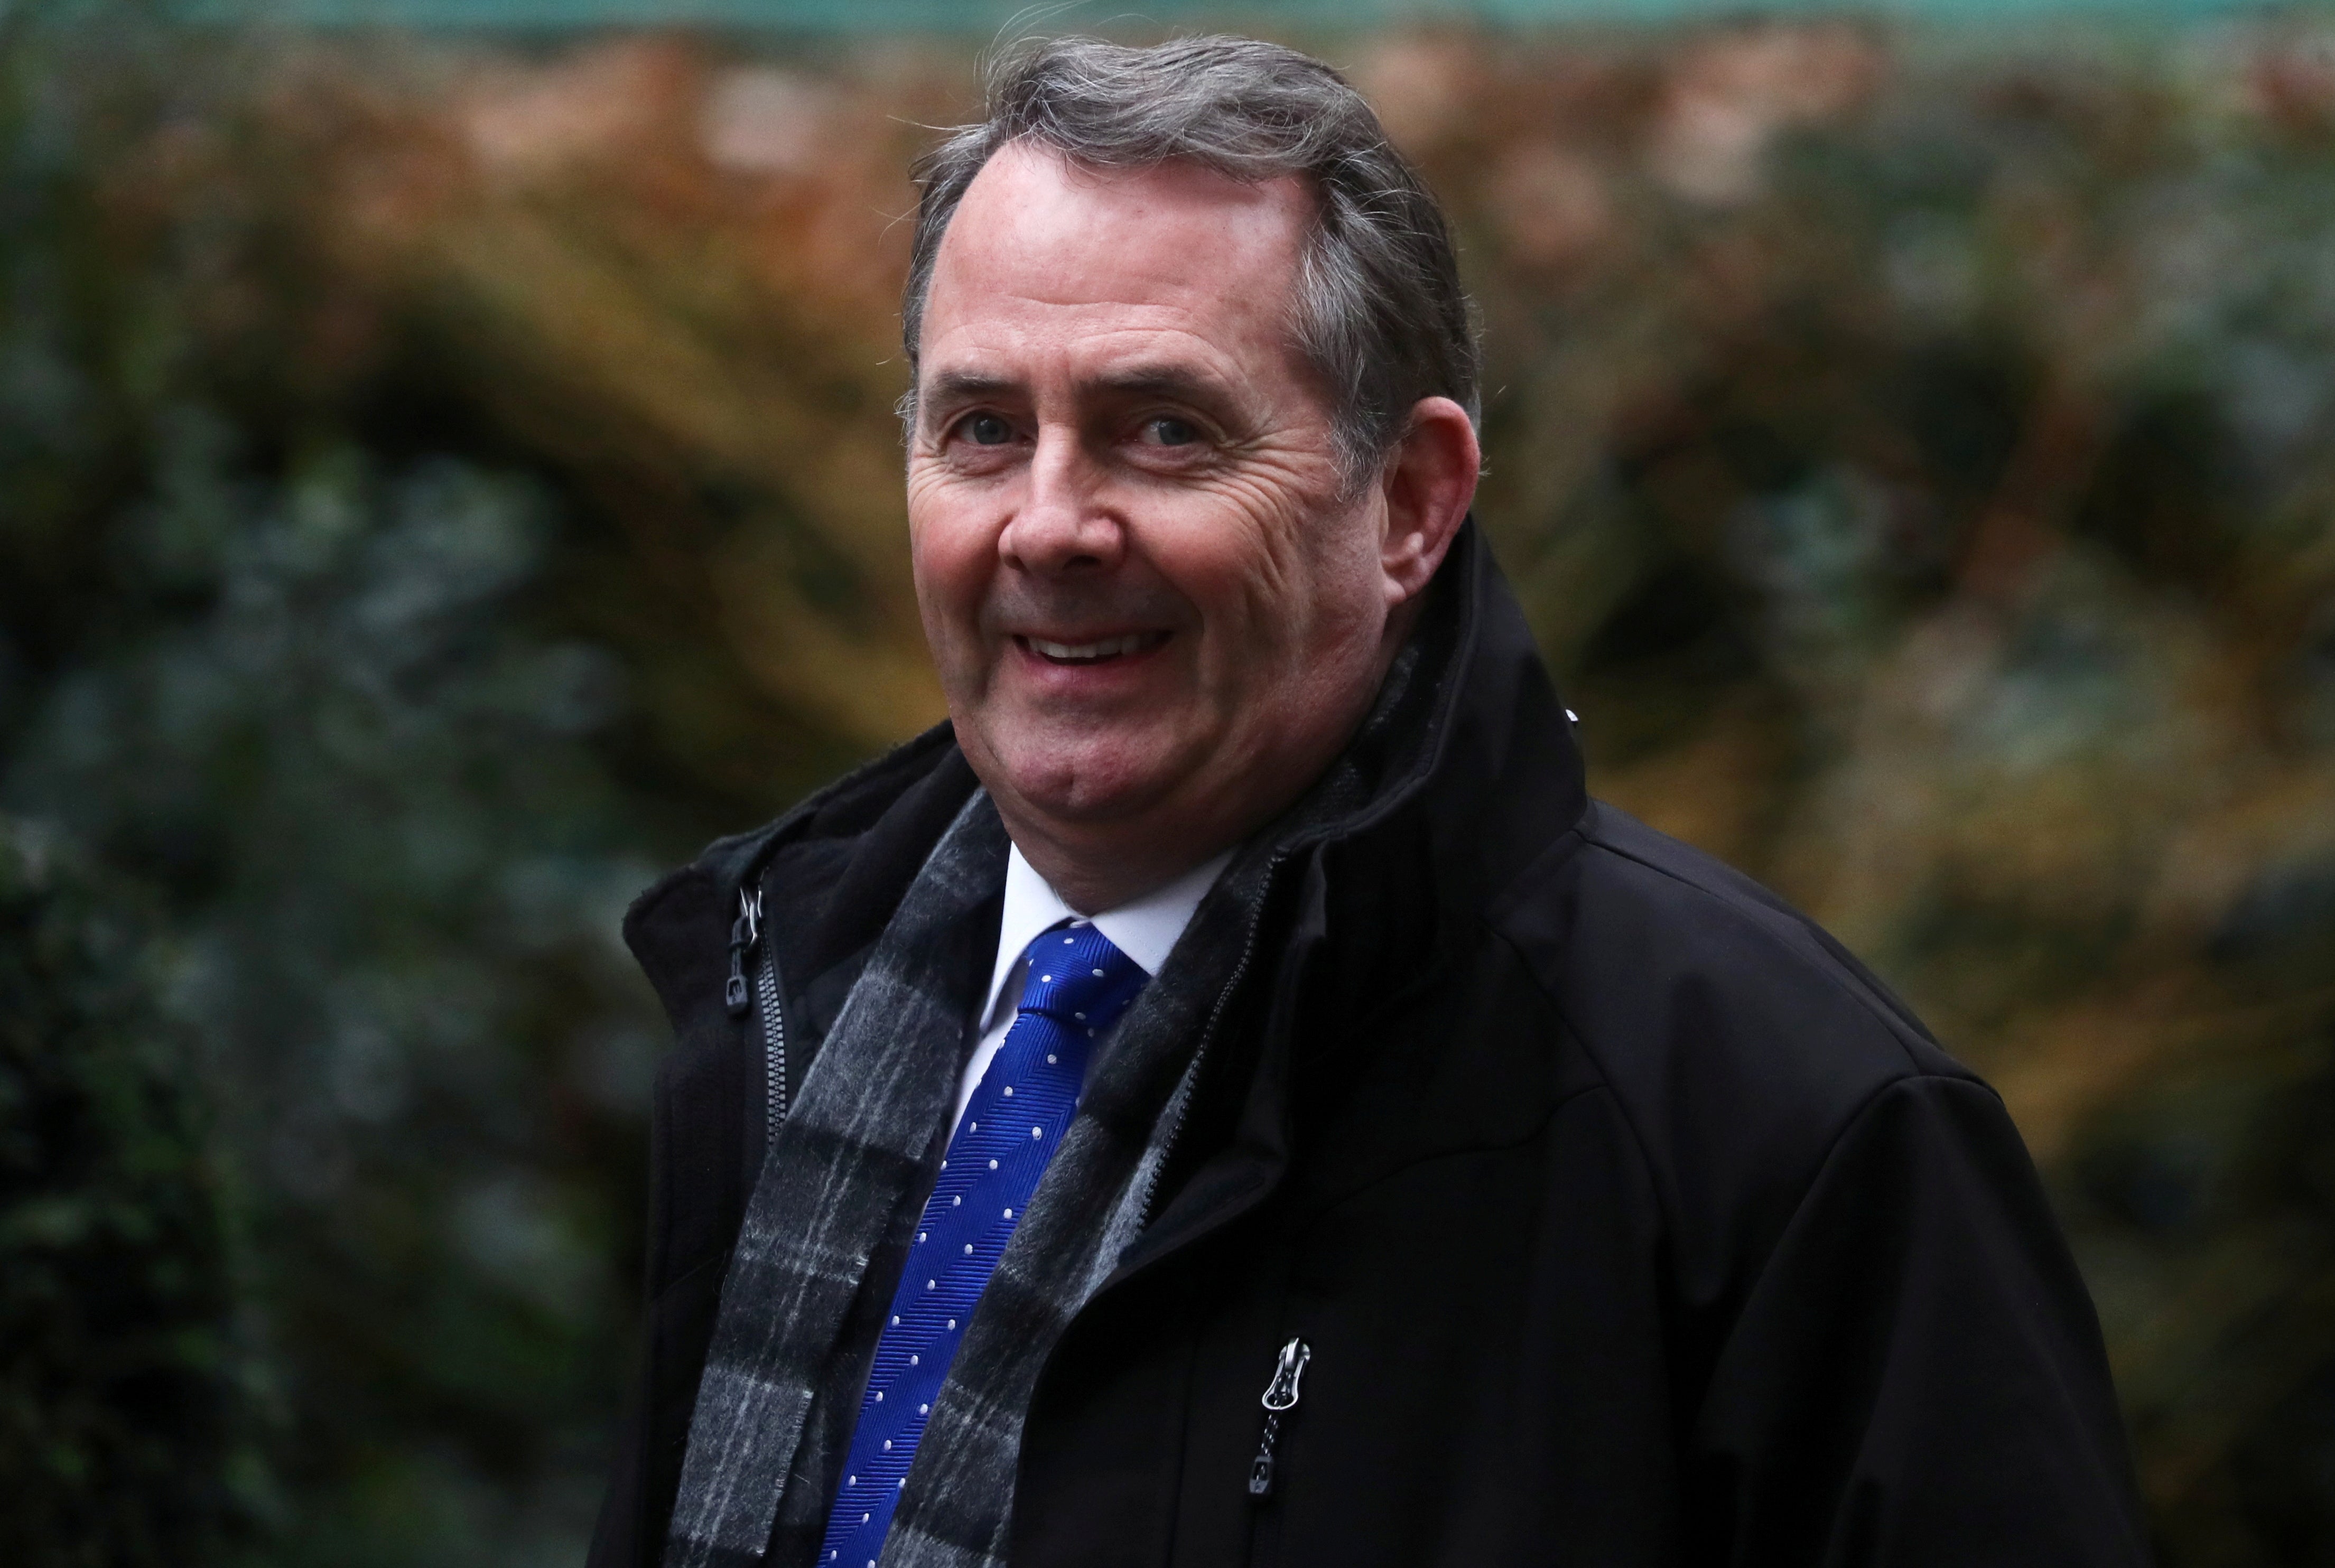 ‘There is no point in damaging the competitiveness of economies such as the UK while other countries maintain their competitive edge,’ argues the former trade secretary Liam Fox